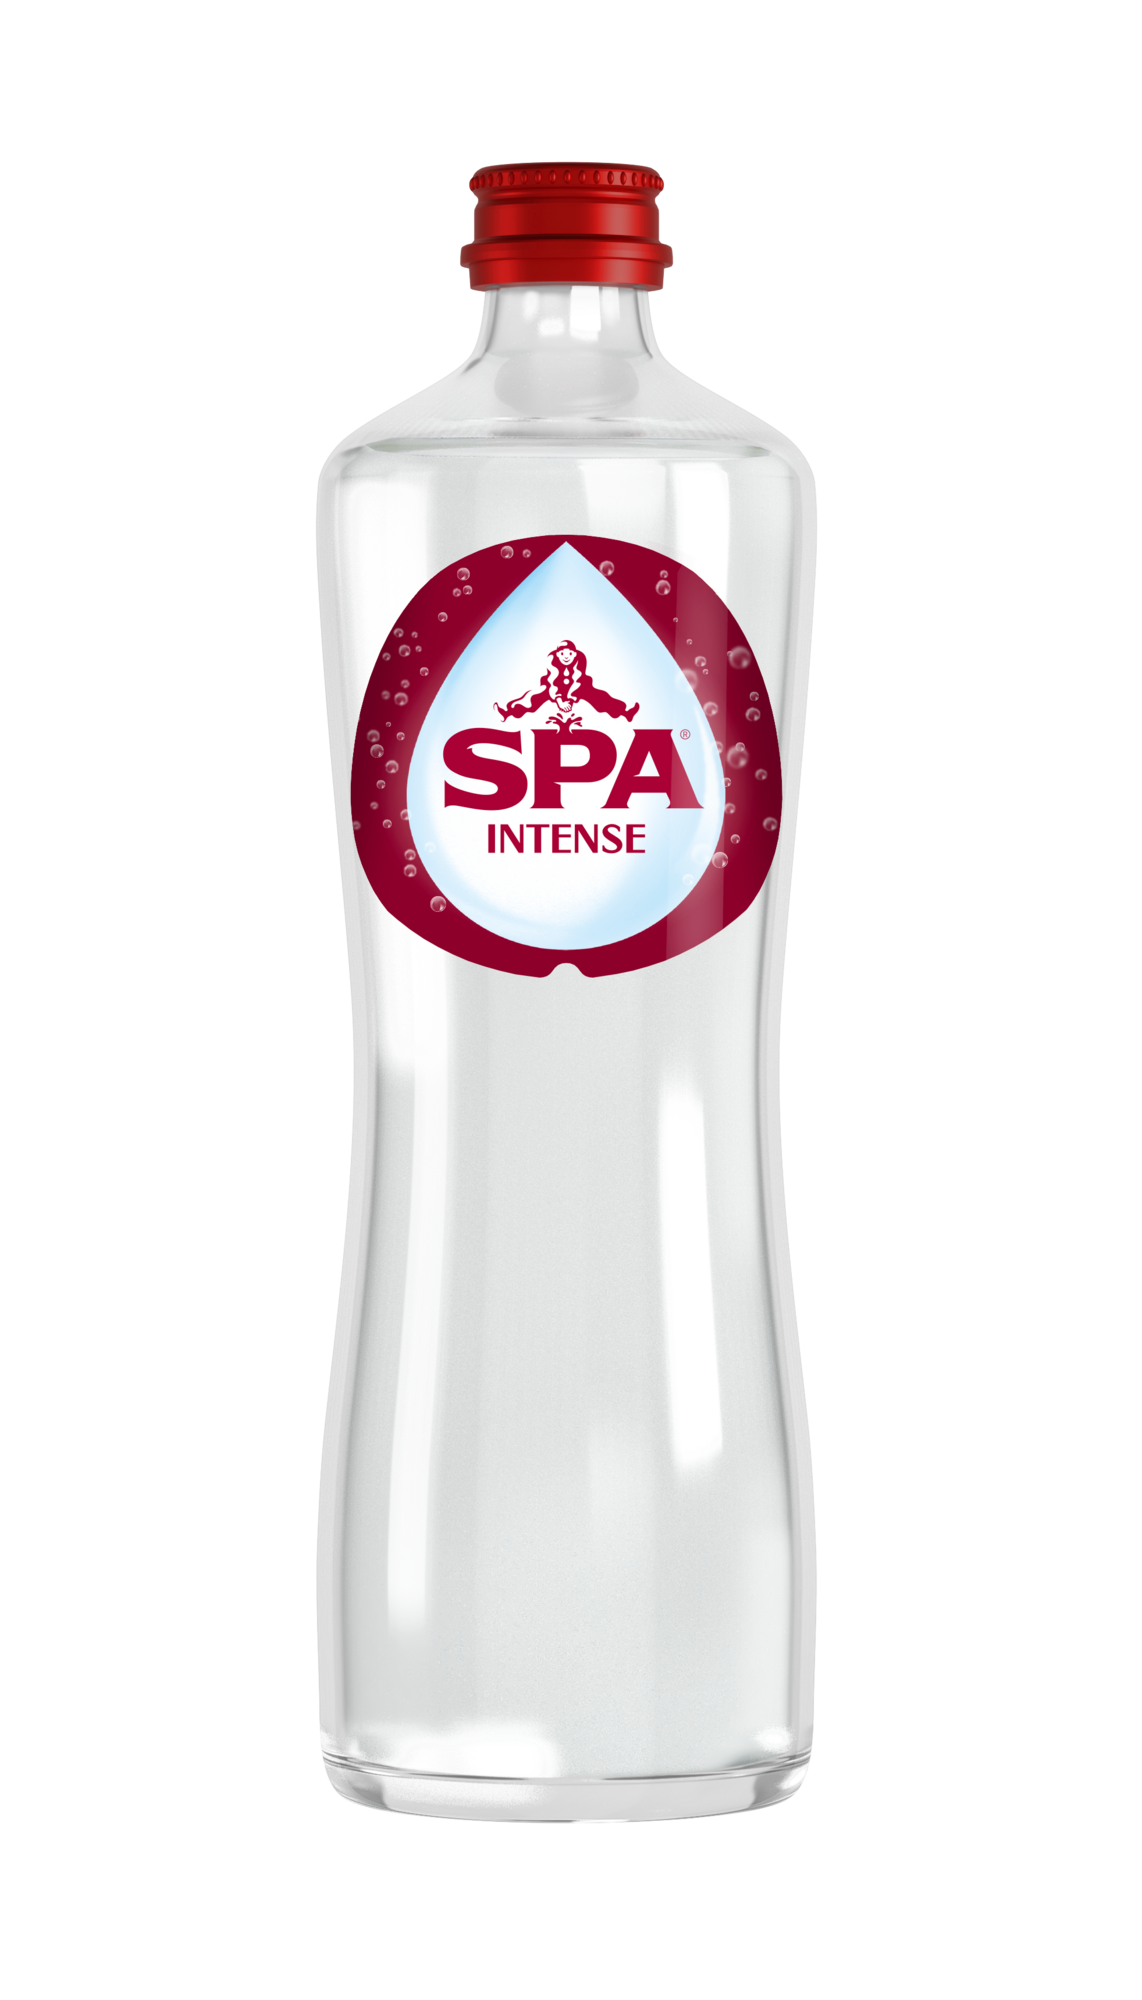 66899 Spa intense rood glas 12x75cl